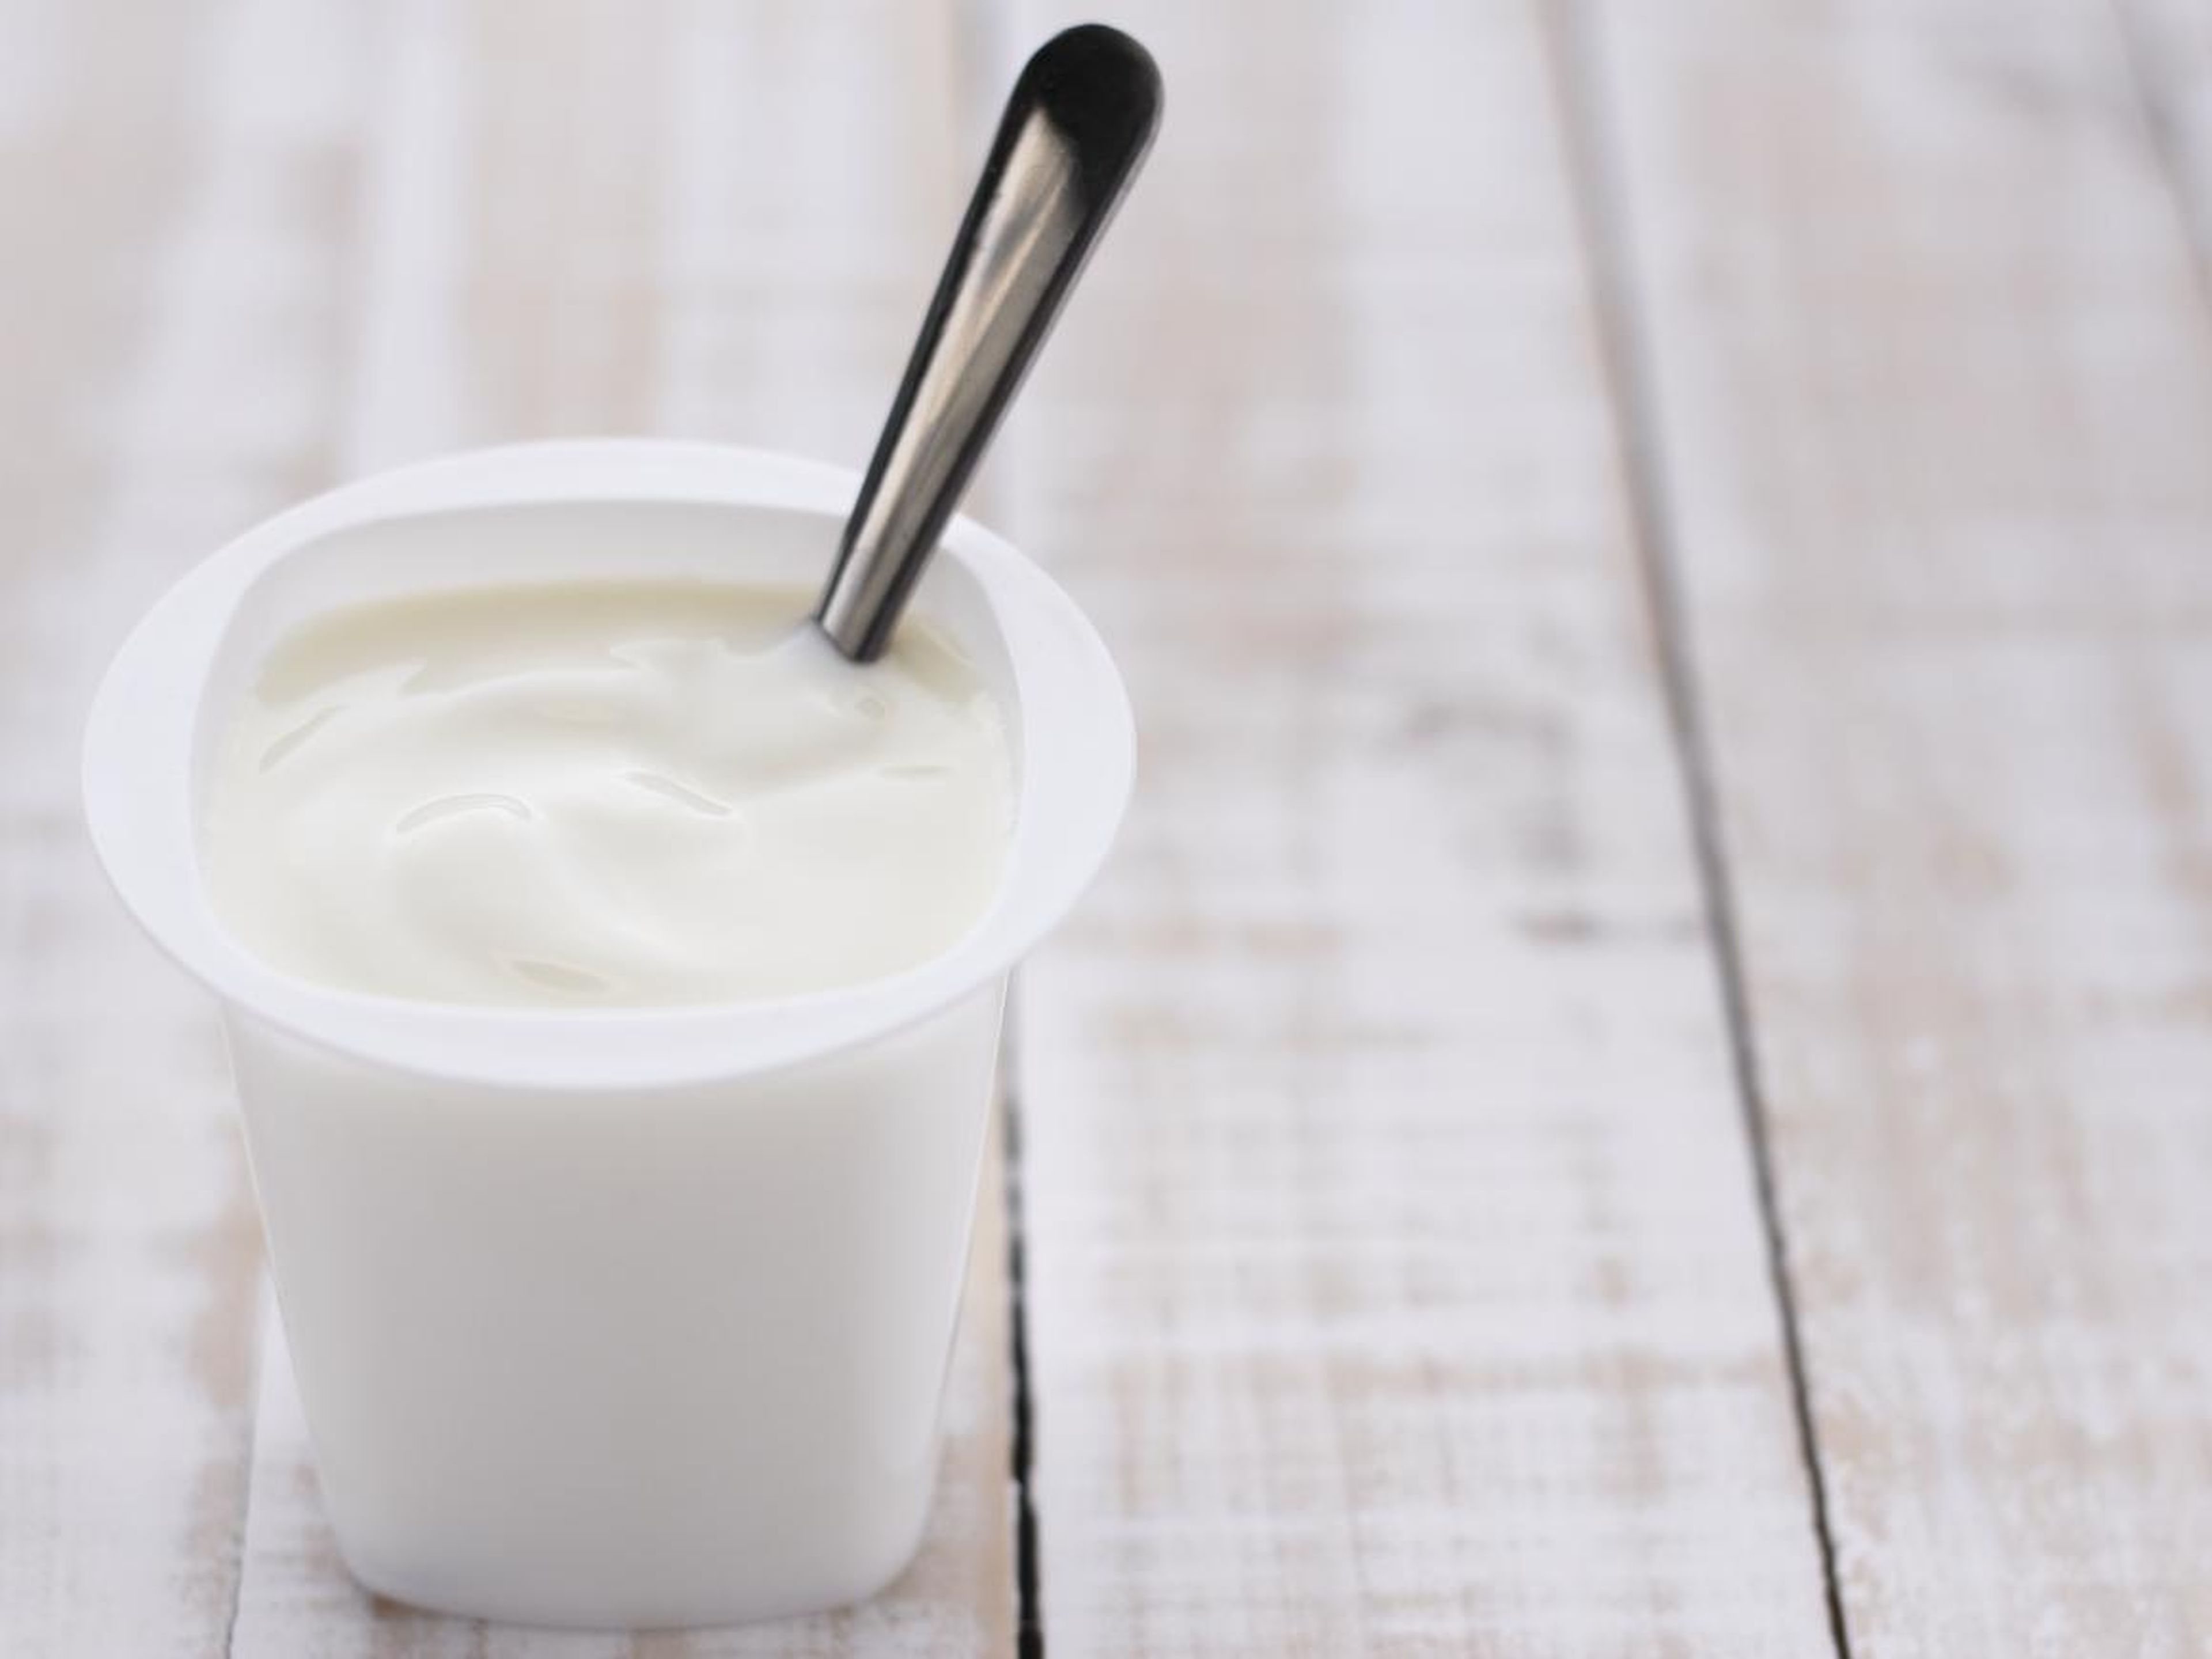 Milk, yogurt, and cheese are fair game on the DASH diet as long as they're low-fat or fat-free.